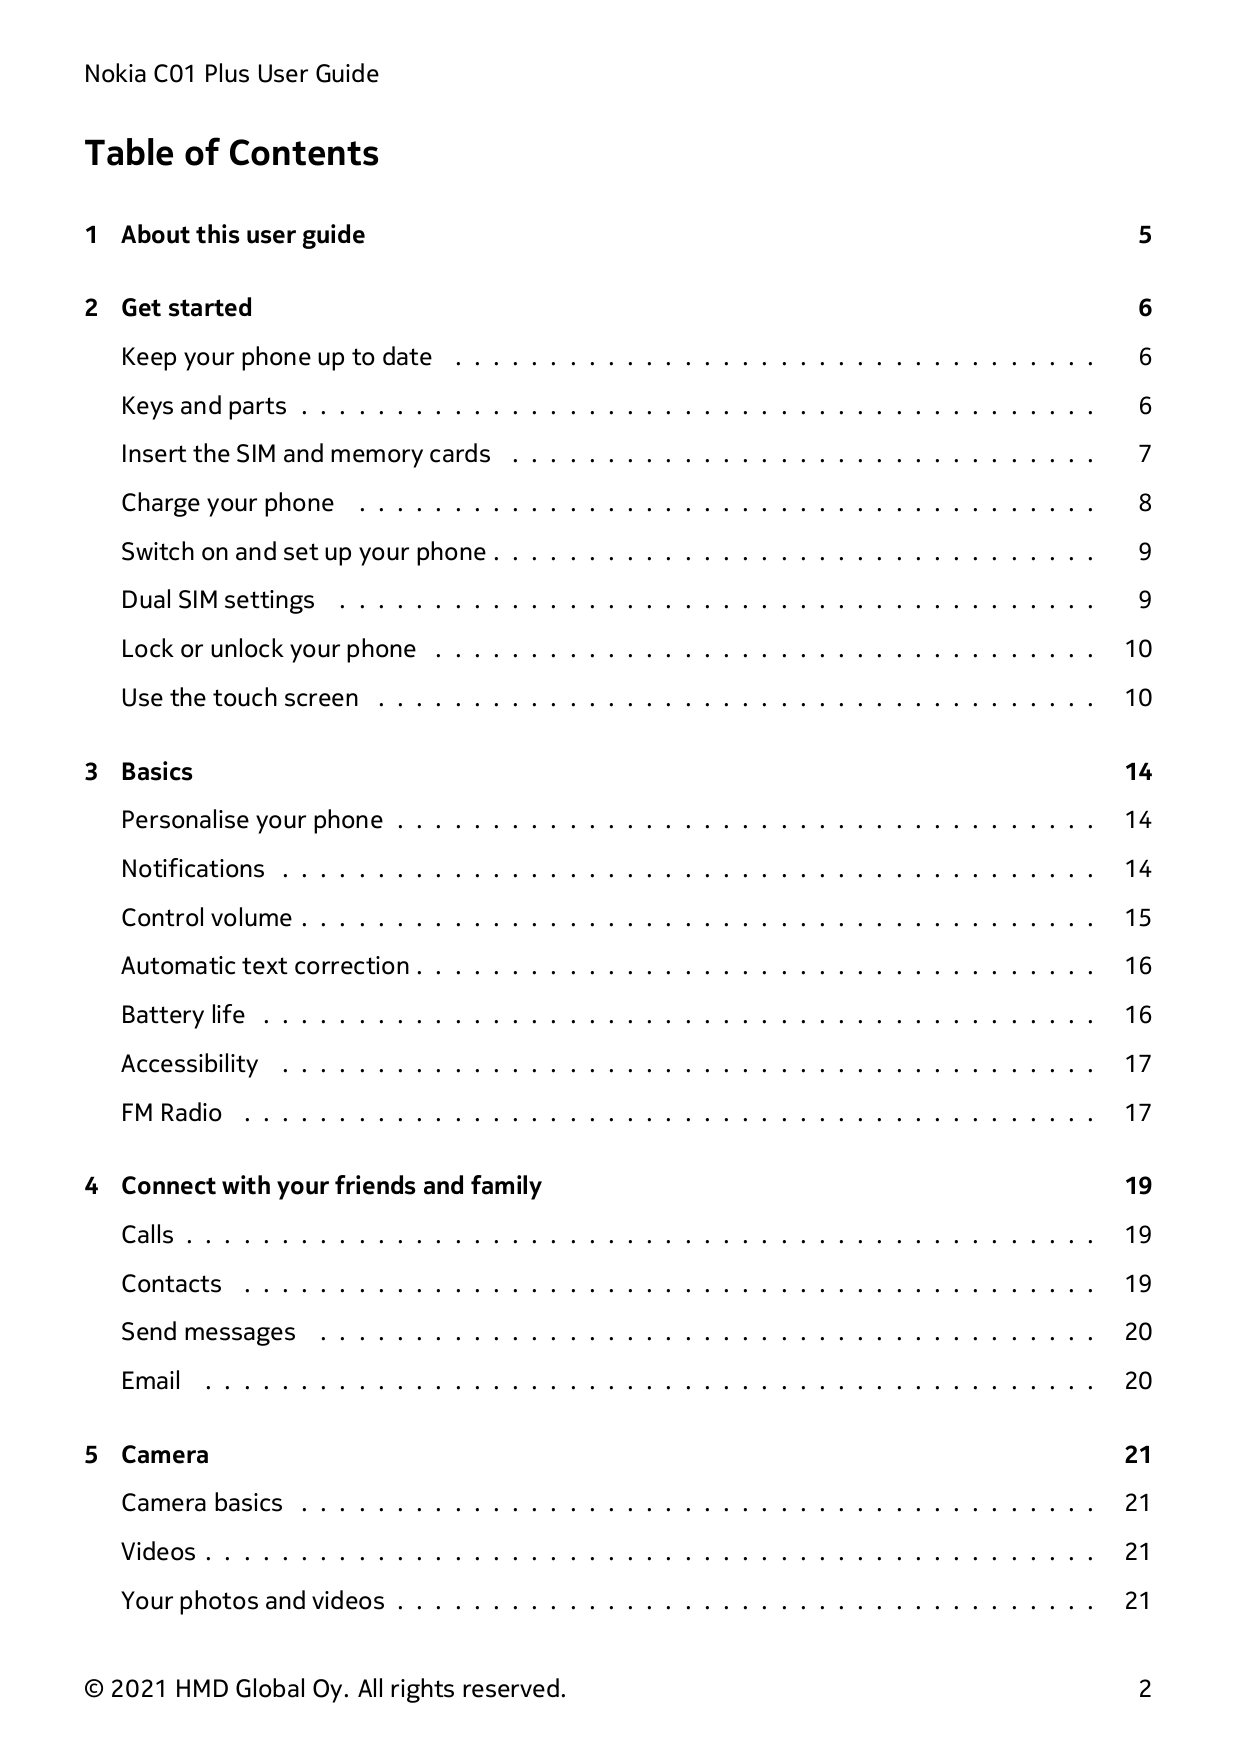 Nokia C01 Plus User GuideTable of Contents1 About this user guide52 Get started6Keep your phone up to date . . . . . . . . . . .